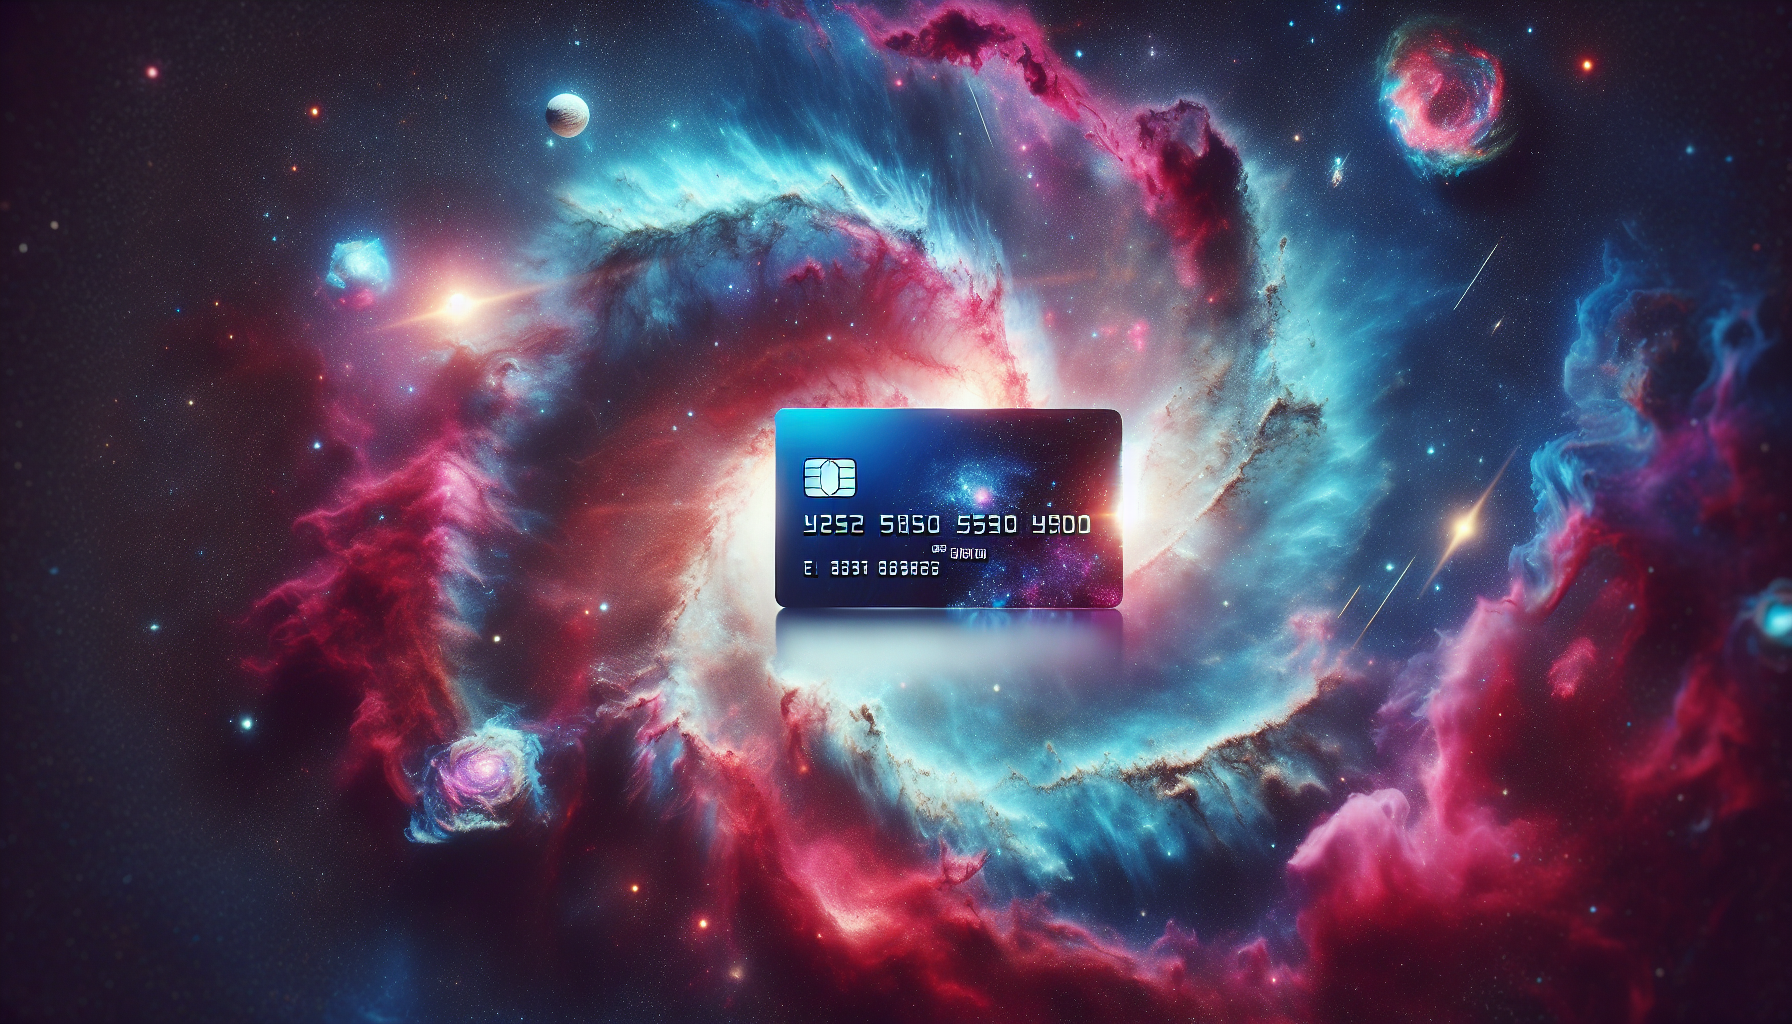 A credit card floating in the cosmos with galaxies and nebulae swirling around it.